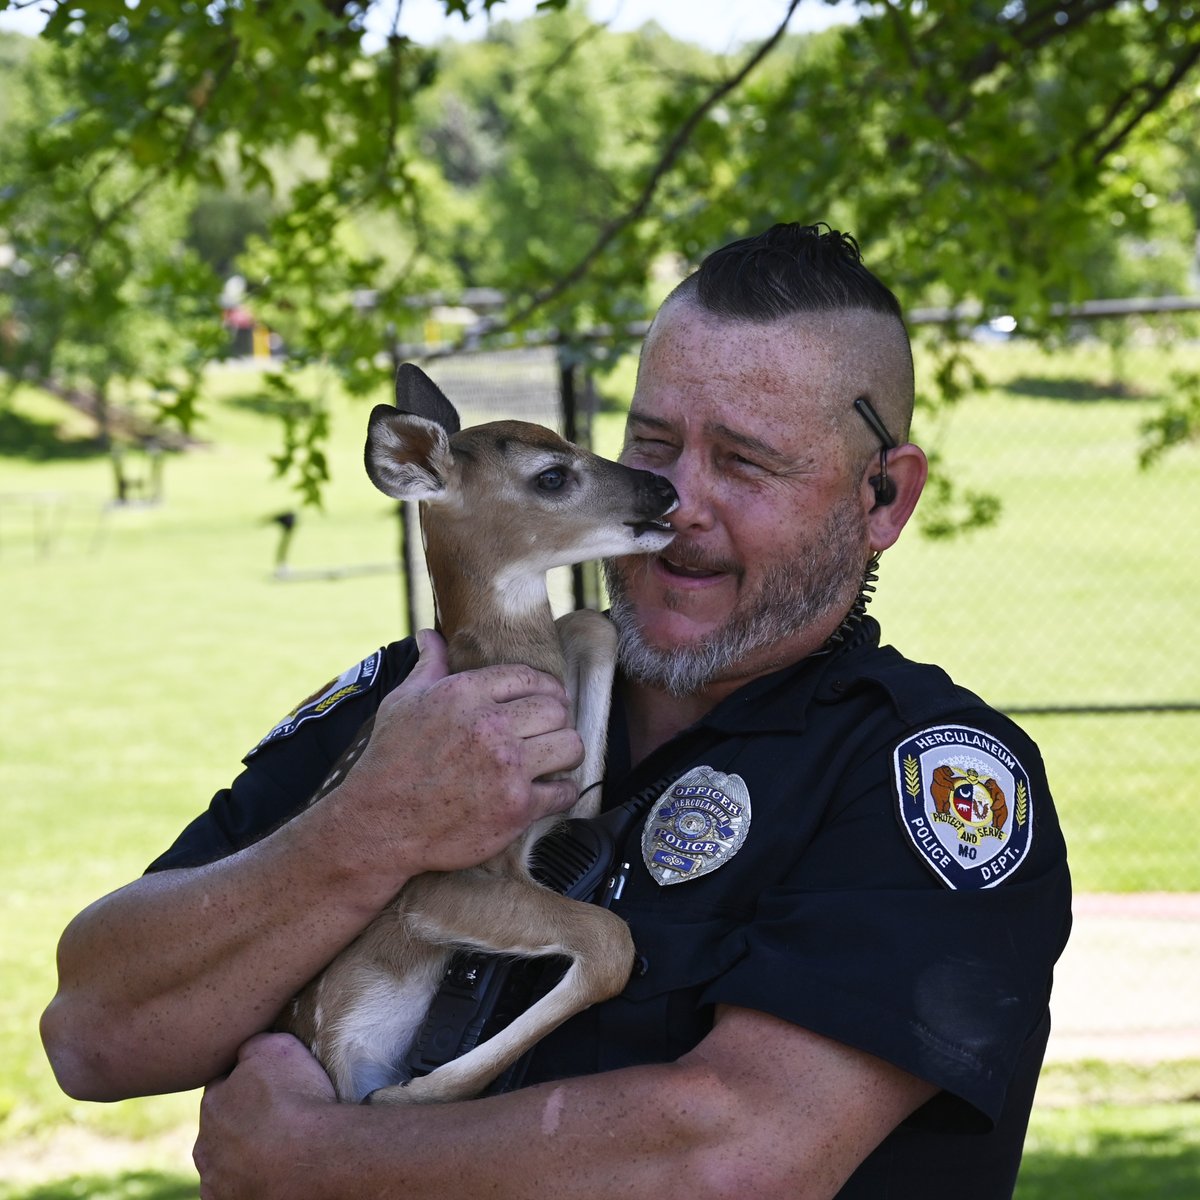 Officer Joe Kaltenbronn found a new friend in front of Herculaneum High School. He moved the fawn away from traffic, but the newborn decided to follow him. The last time he picked up the baby deer, he got kisses. #GoBlackcats @DrClintFreeman @dix_stephanie @HerculaneumCity